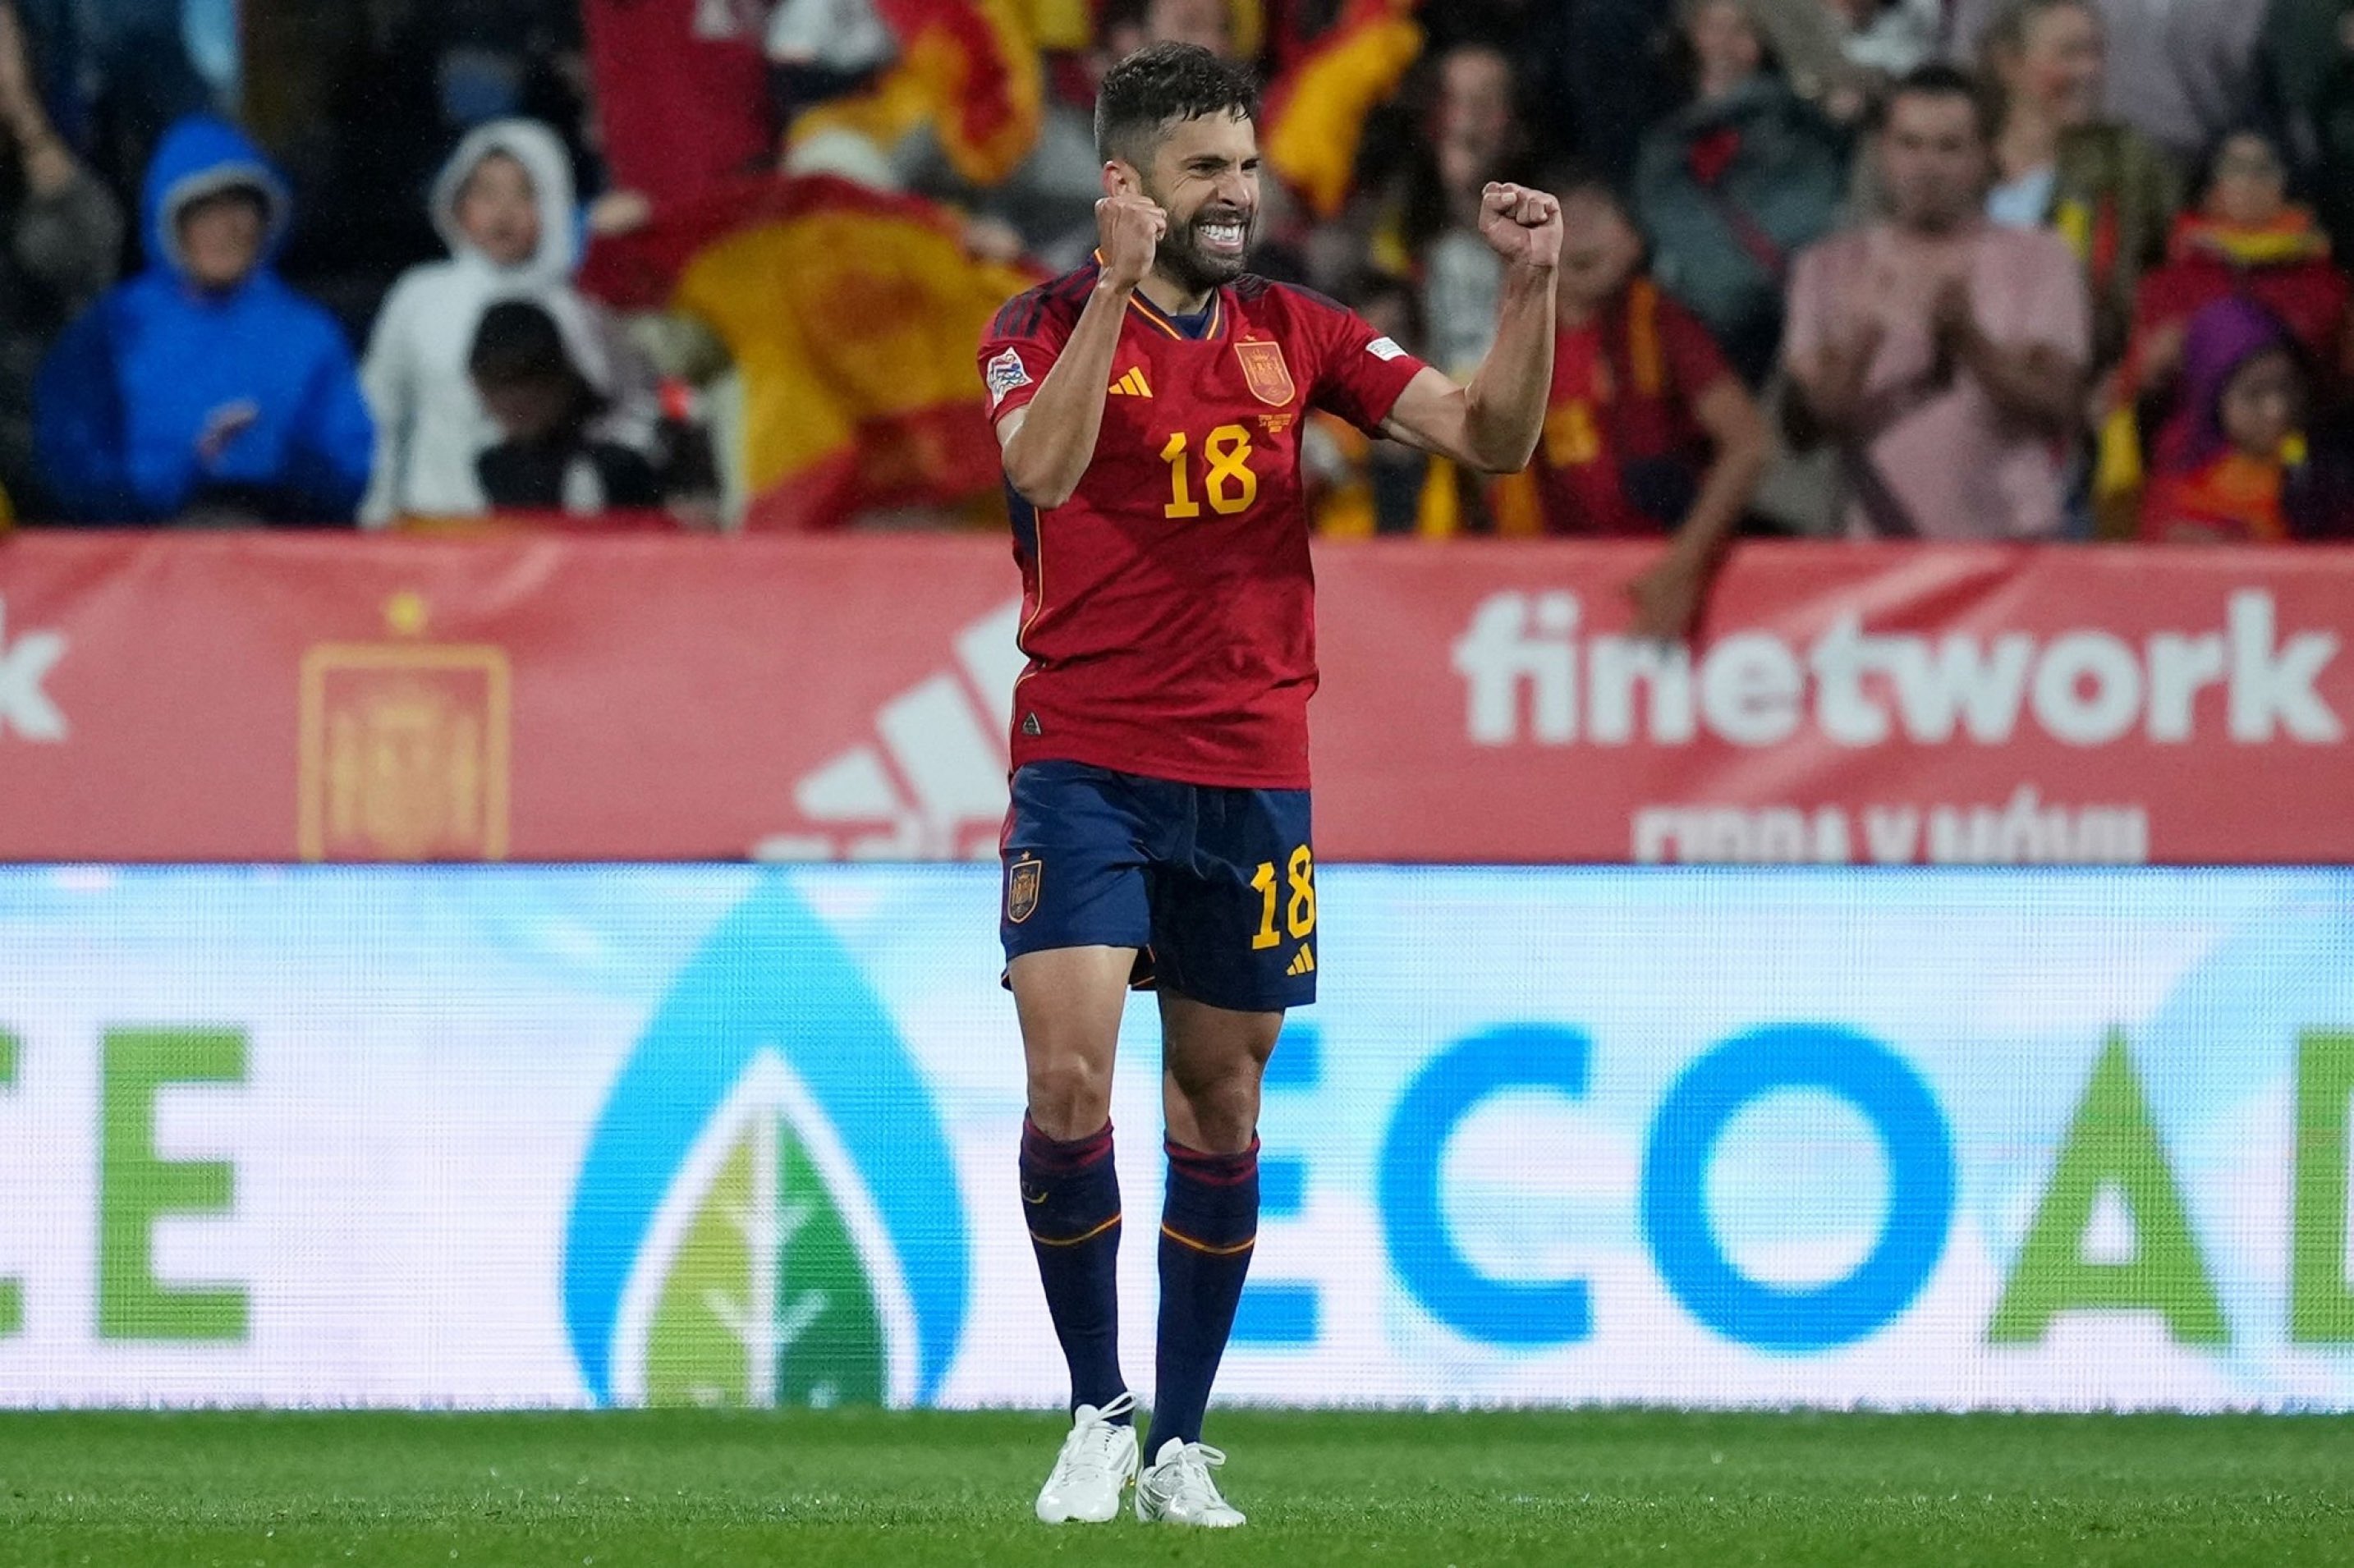 Jordi Alba equalized briefly for Spain before they conceded again